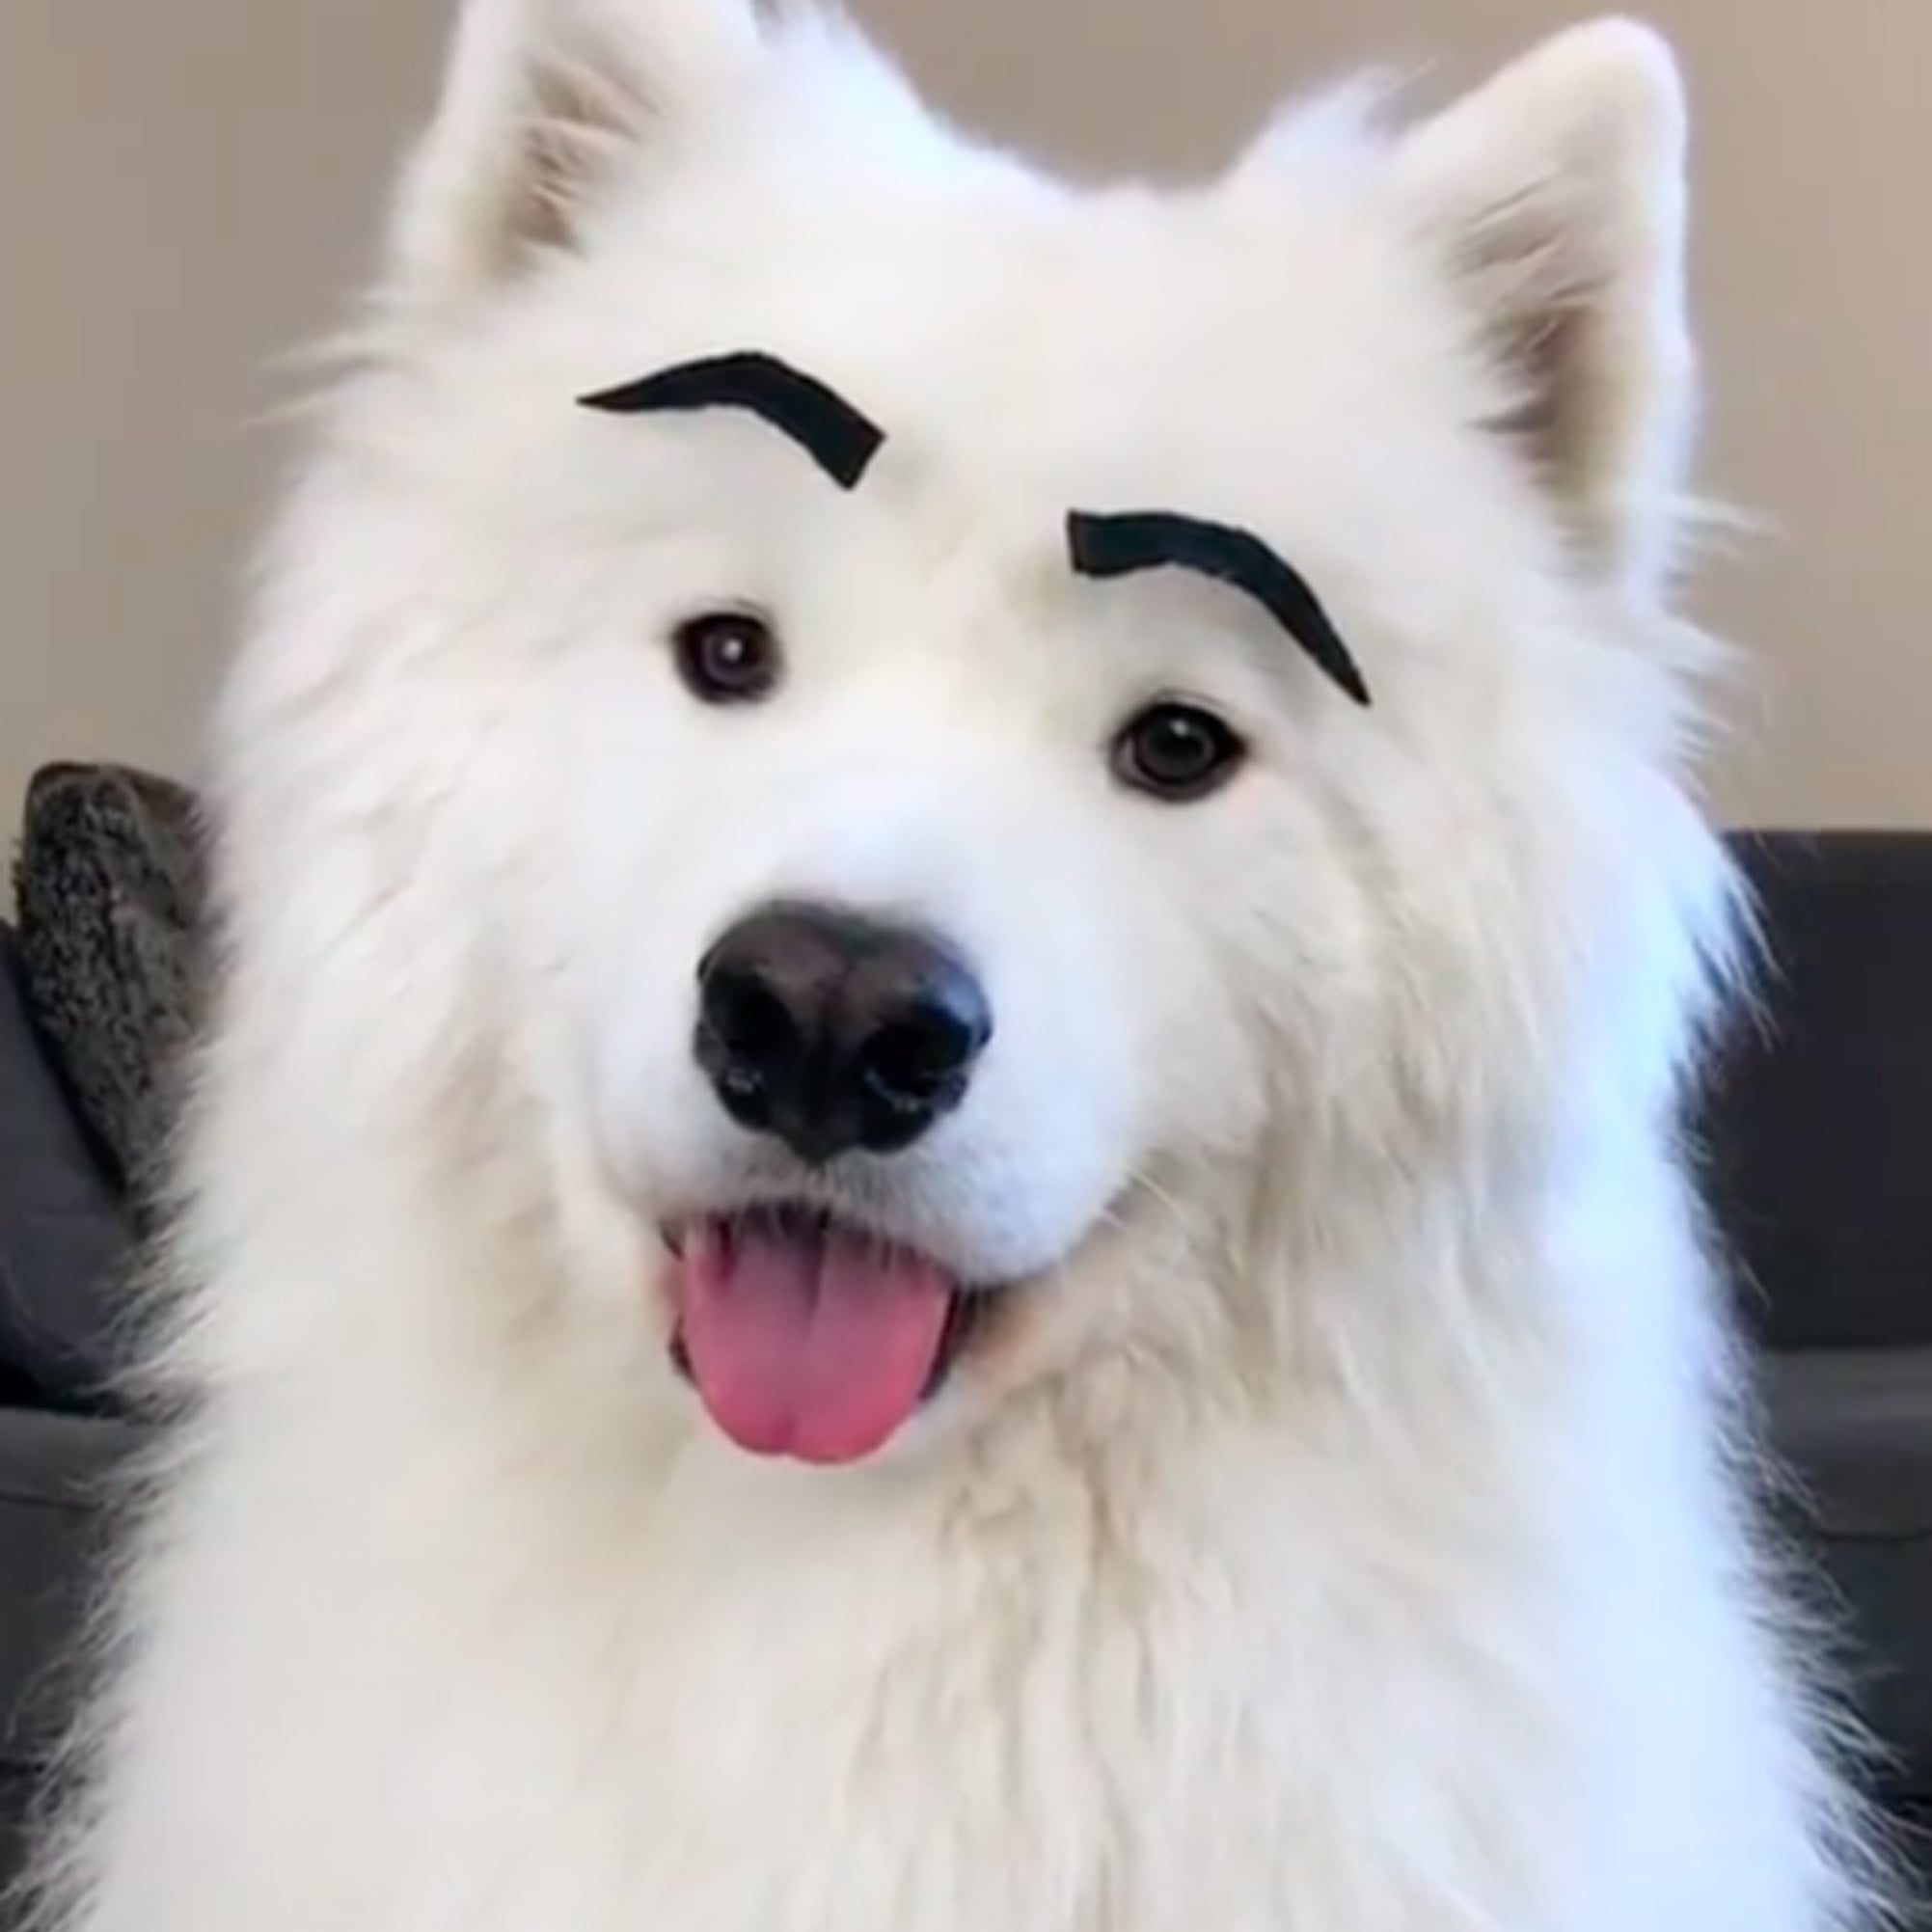 Samoyed Dog With Eyebrows on His Face 